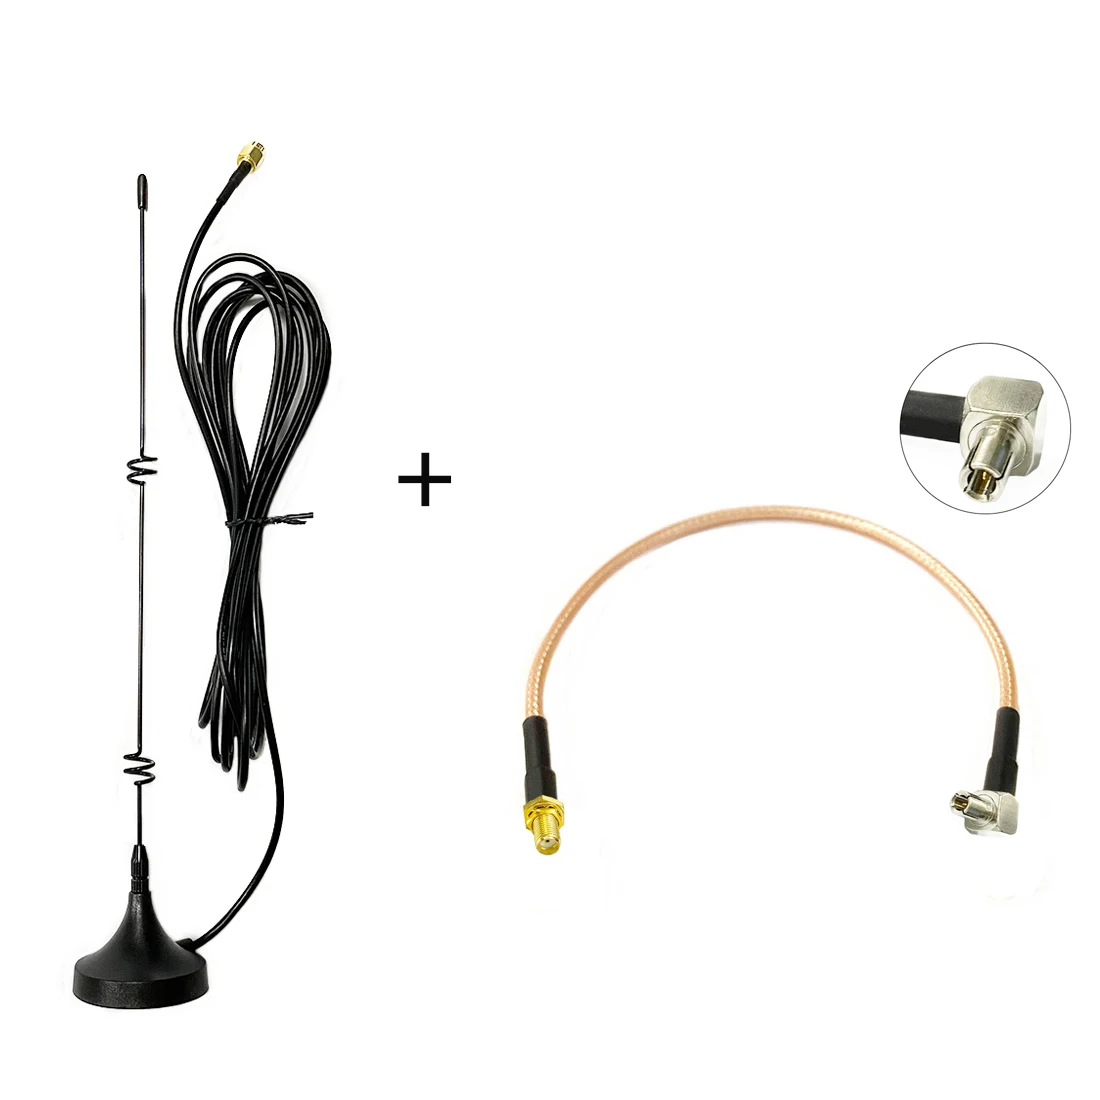 4G 3G GSM Antenna 6dbi High Gain Magnetic Base with 3meters Cable SMA Male +SMA Female Connector  to TS9 Male RG316 Cable 15cm 10pcs 3meters k type mini connector thermocouple temperature probe sensor 50 350°c temperature sensing line